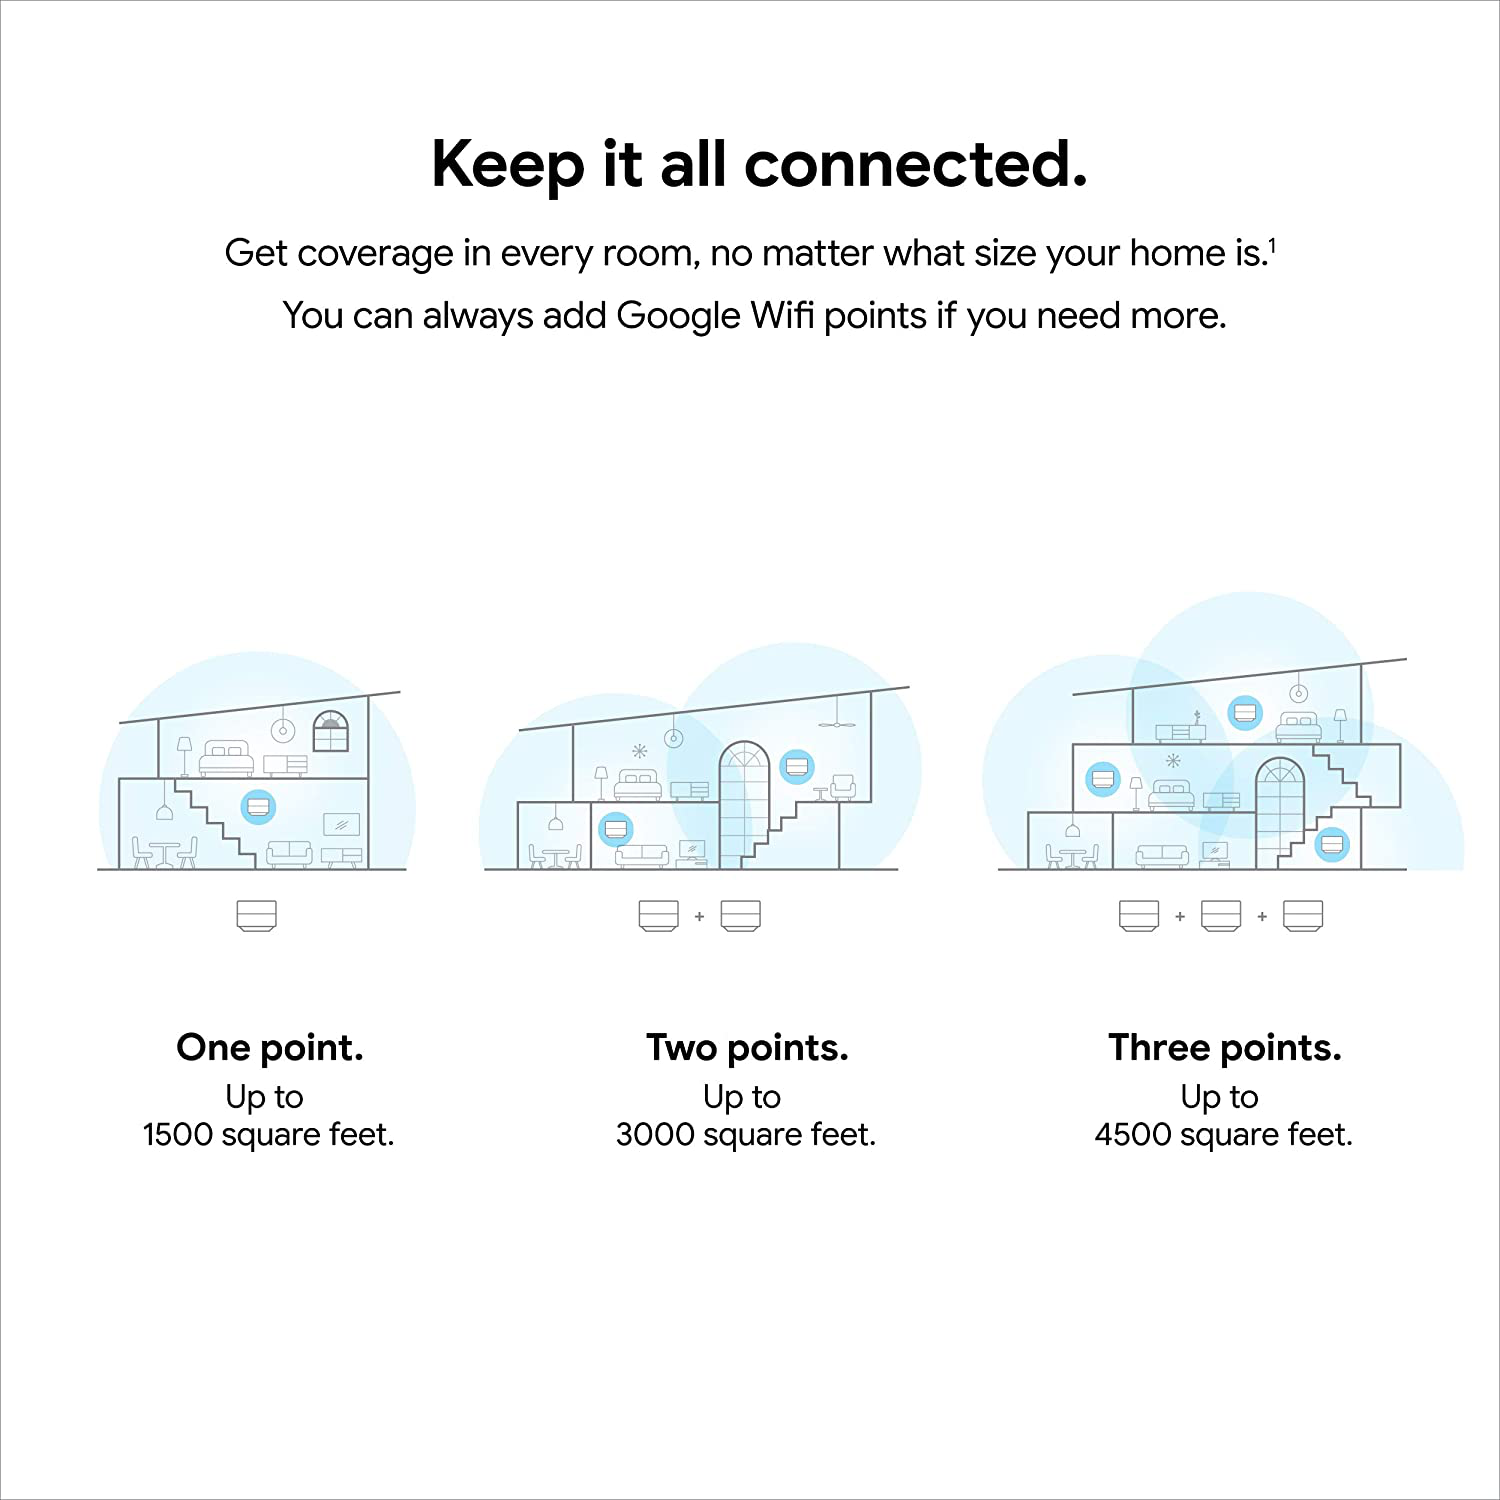 Google Wifi - AC1200 - Mesh WiFi System - Wifi Router - 4500 Sq Ft Coverage - 3 pack